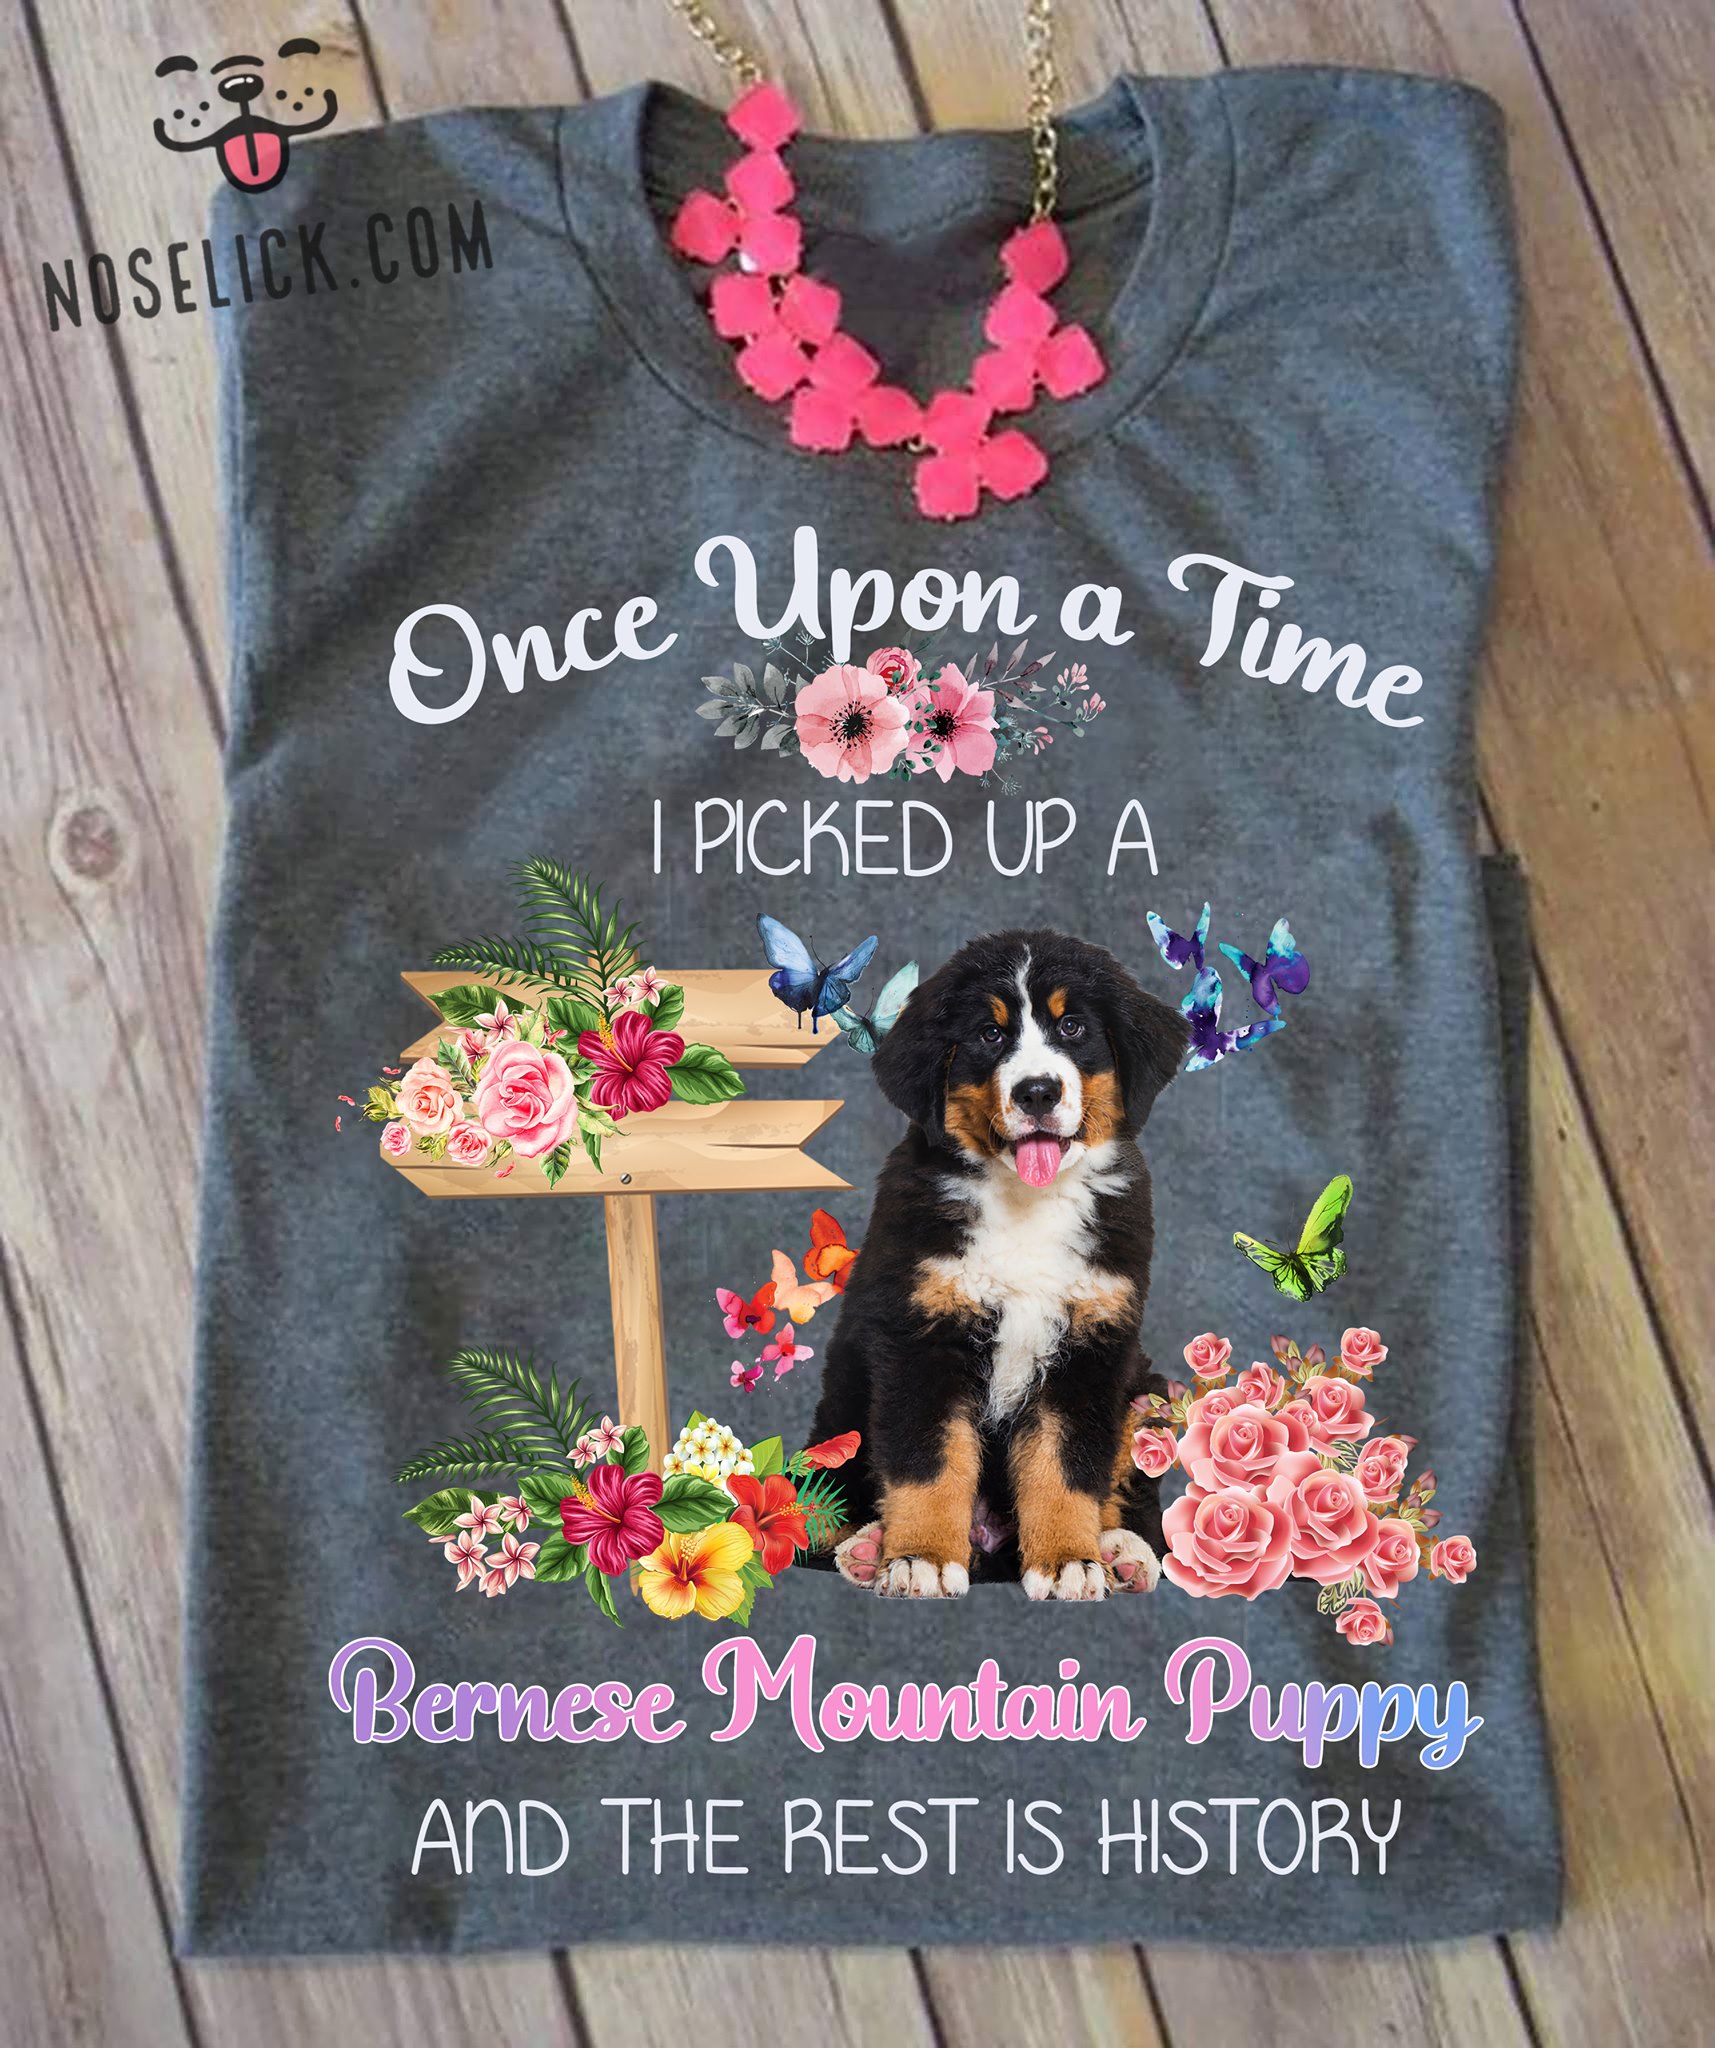 Once upon a time I picked up a Bernese Mountain Puppy and the rest is history - Dog lover